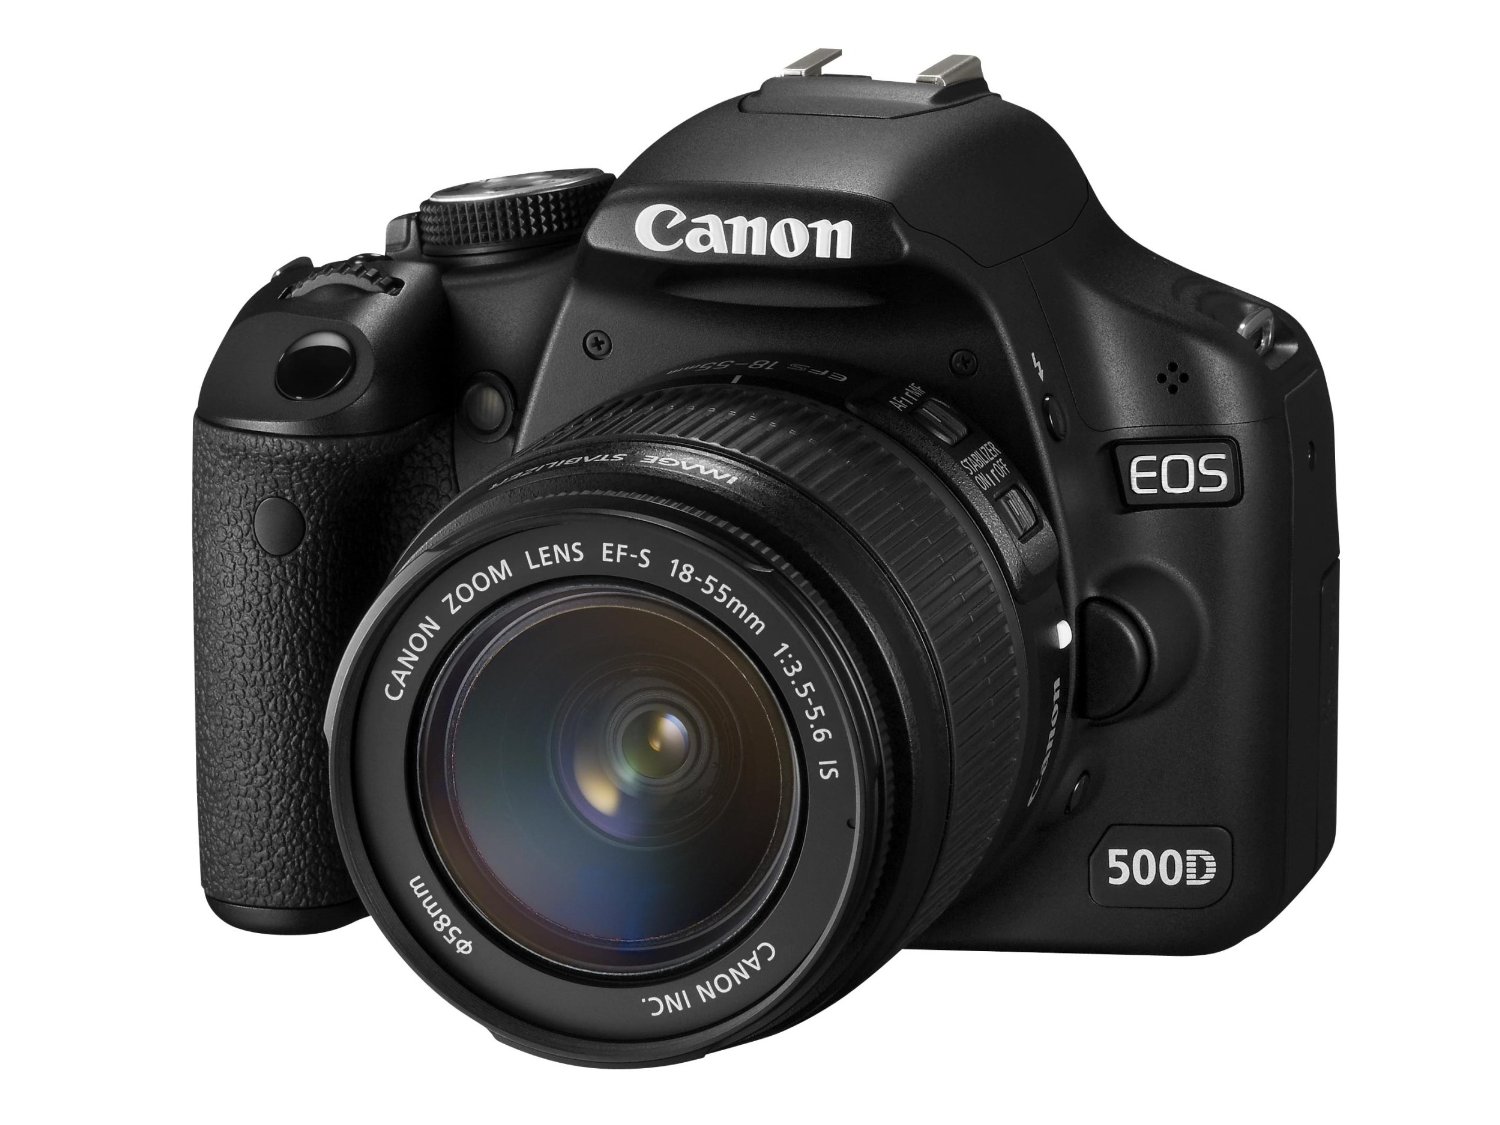 Canon EOS 500D Digital SLR Camera with 18-55mm Lens